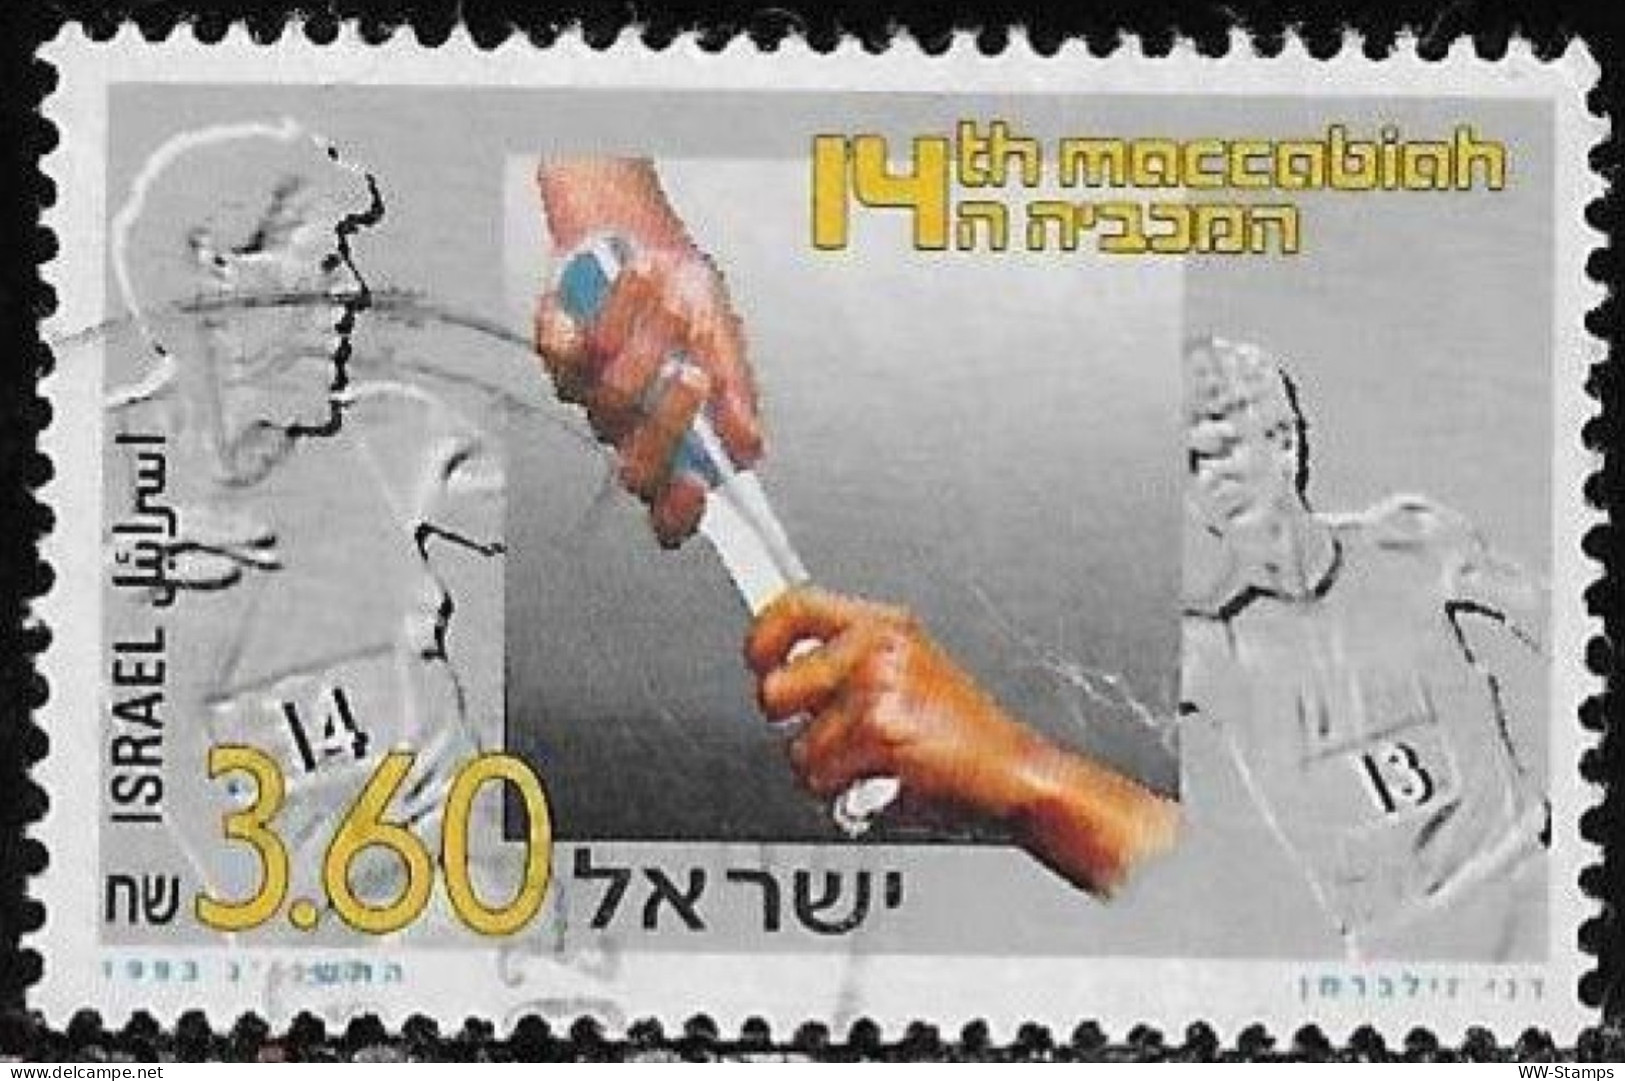 Israel 1993 Used Stamp The 14th Maccabiah Sports Games [INLT10] - Gebraucht (ohne Tabs)